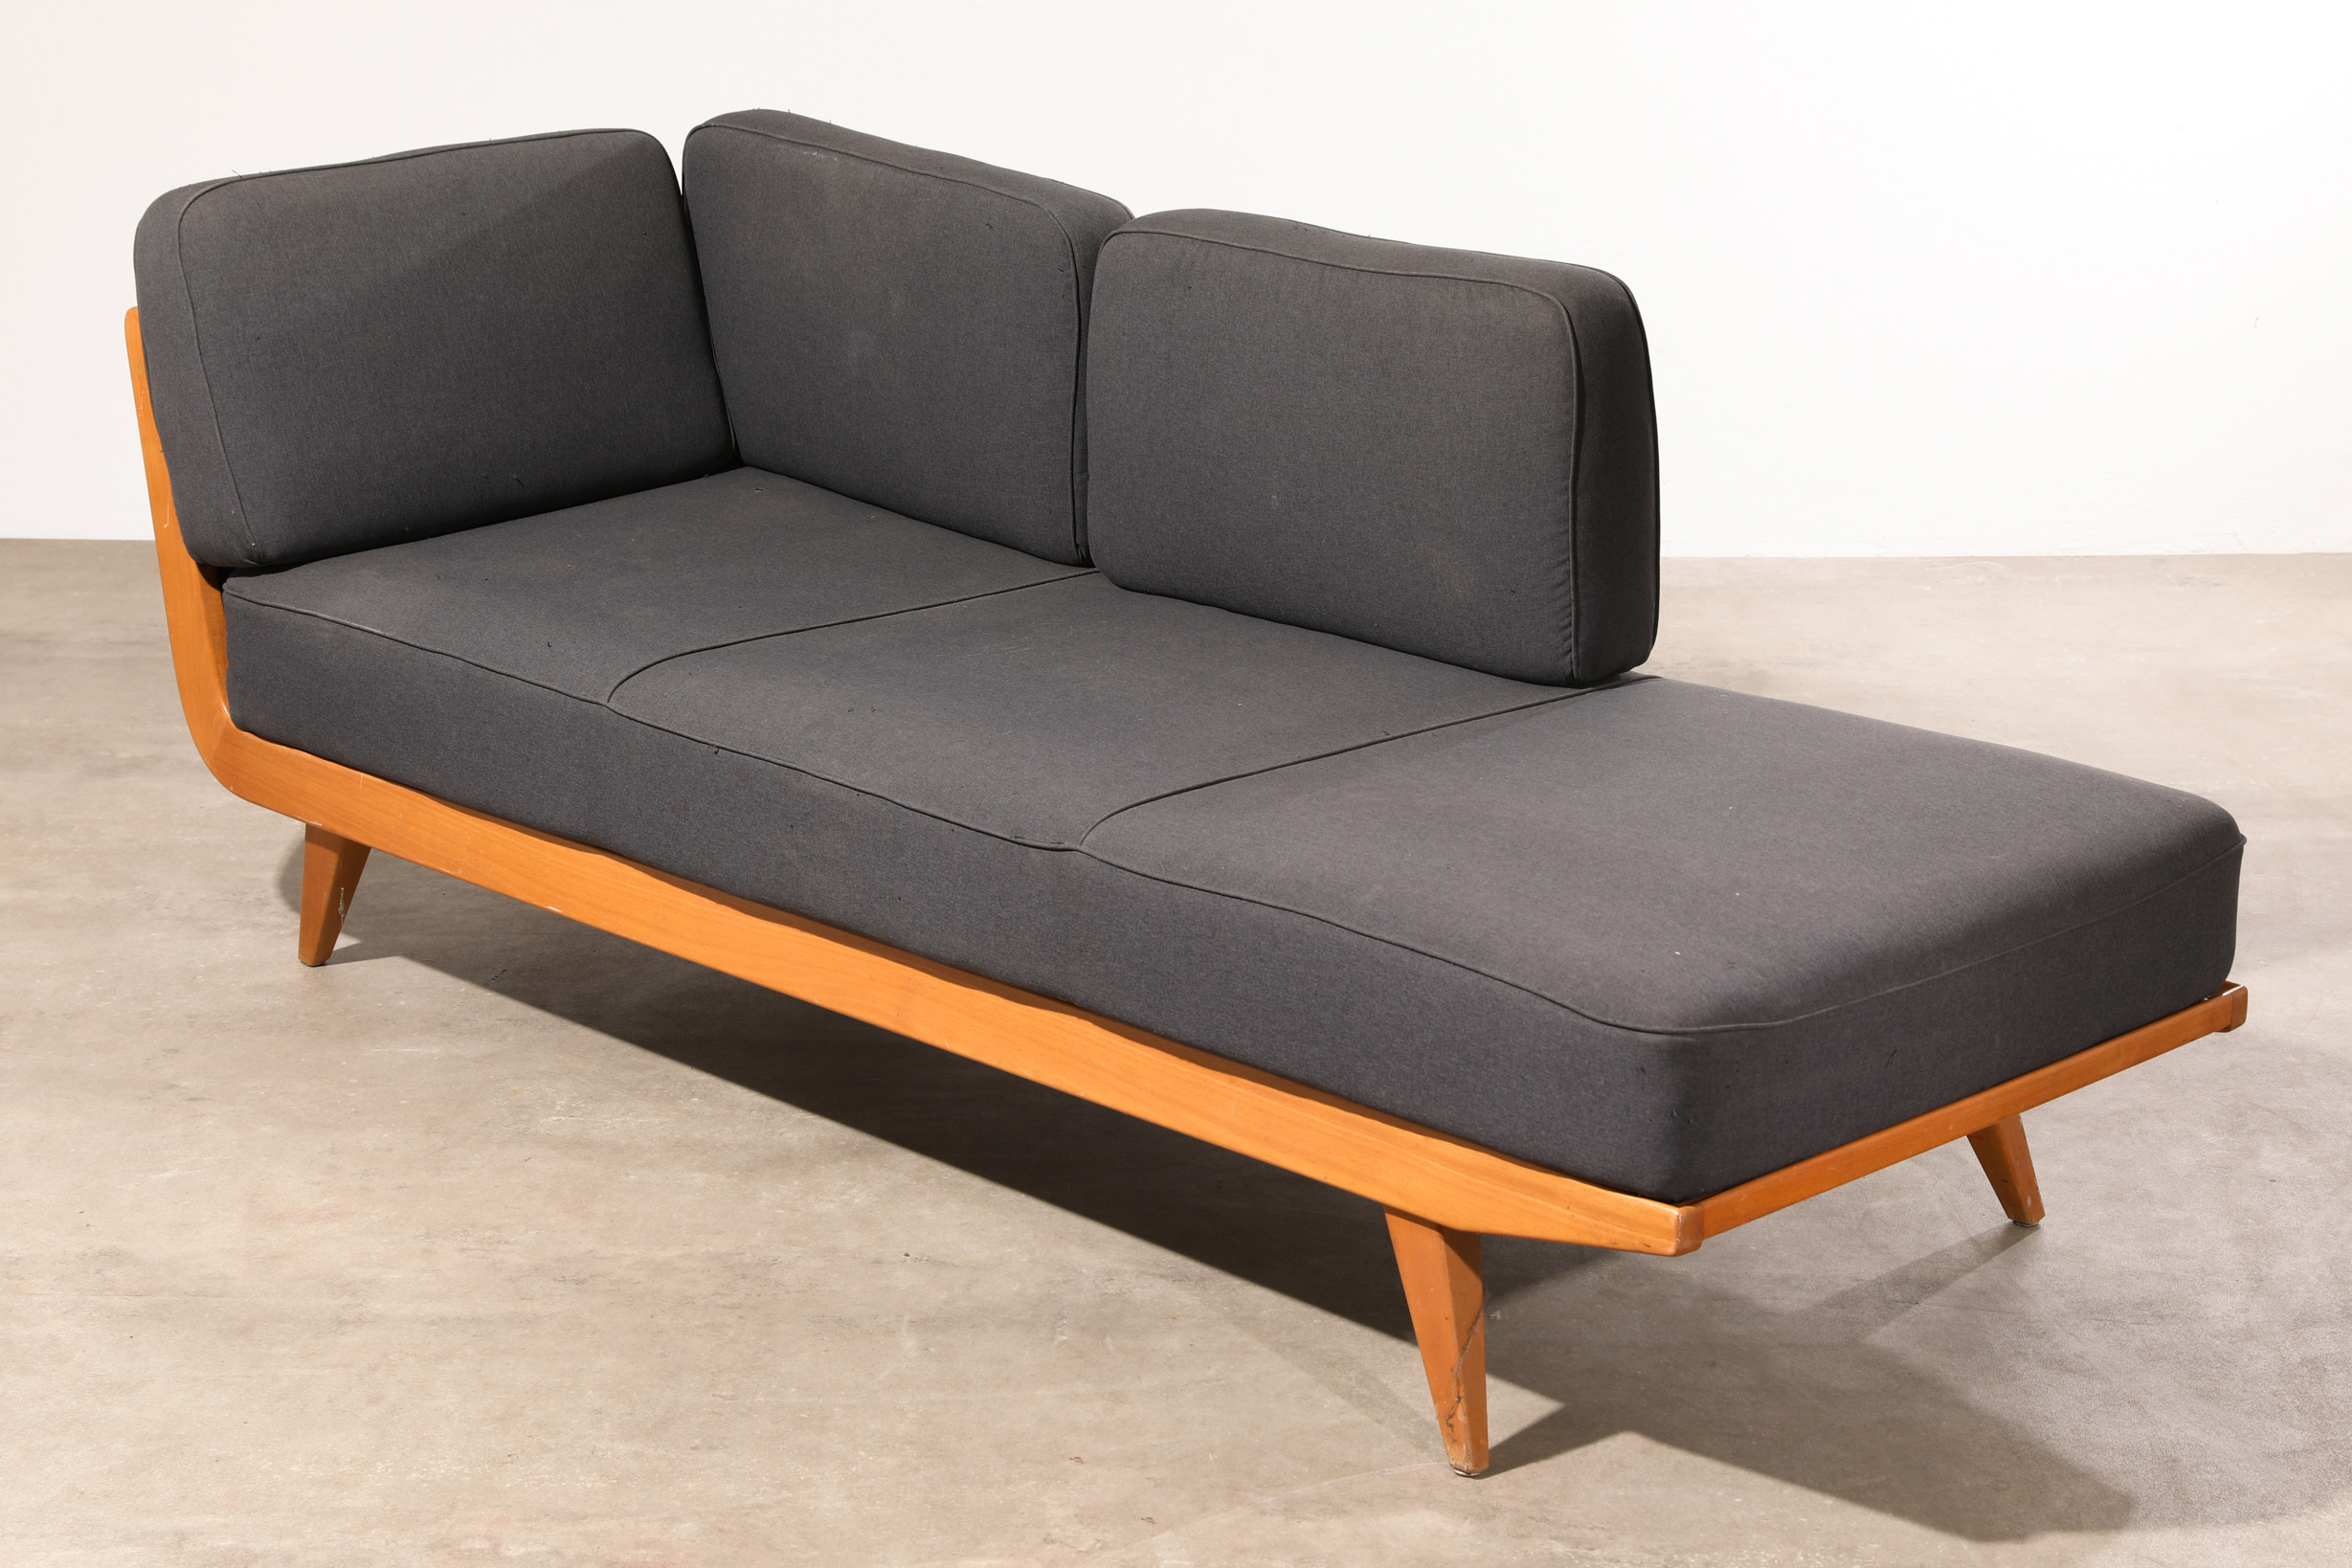 A. K. Schneider, Walter Knoll, Chaiselongue / Daybed, Model Vostra - Image 2 of 7